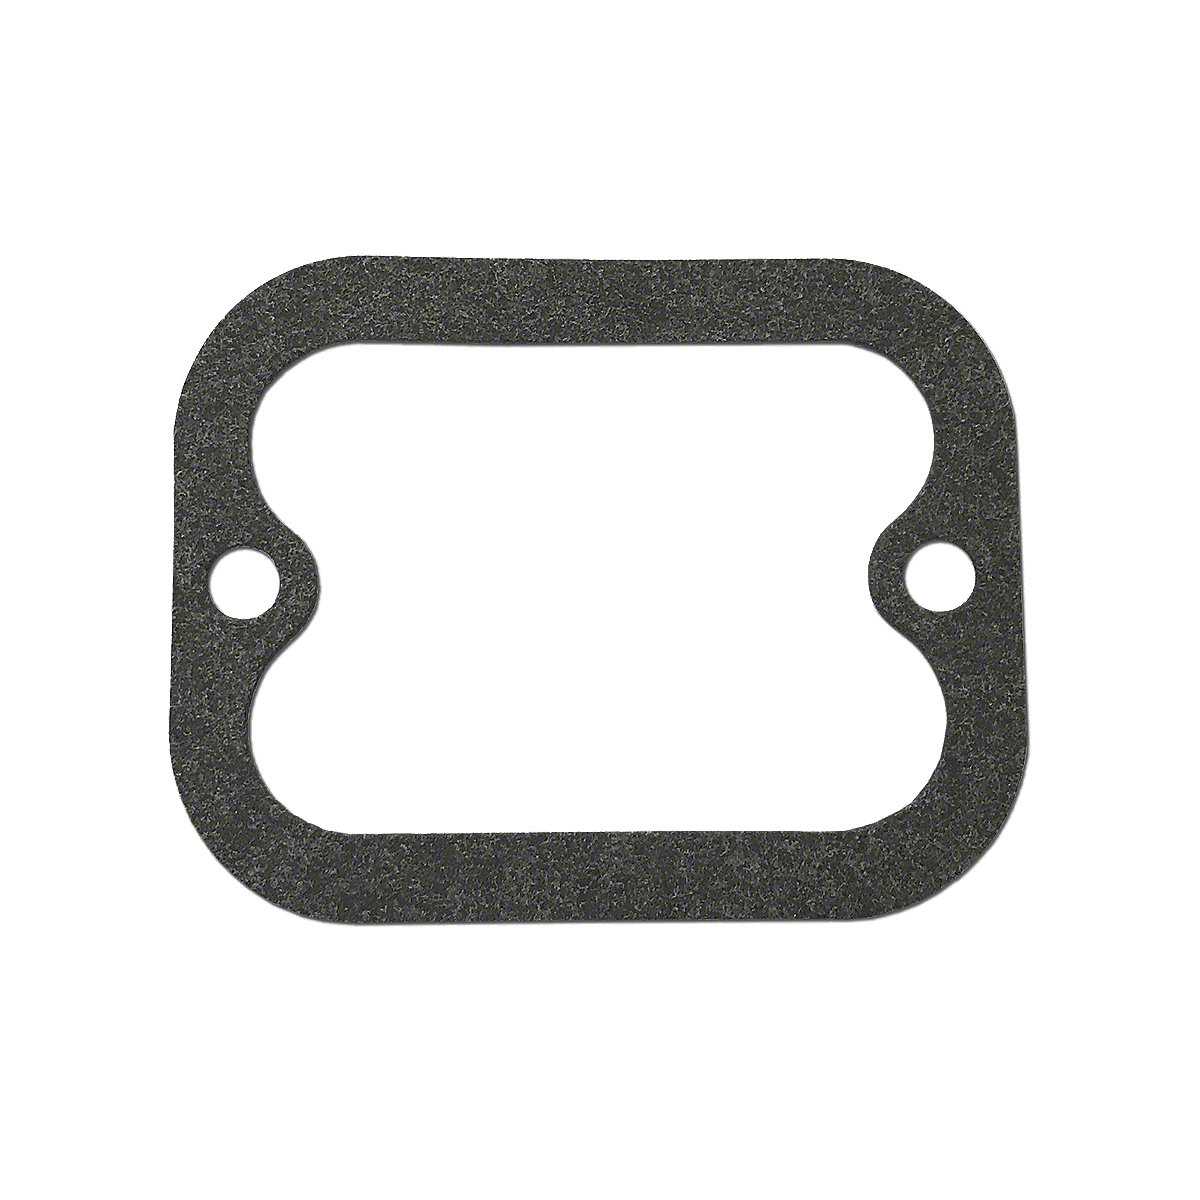 Throttle Lever Cover Gasket